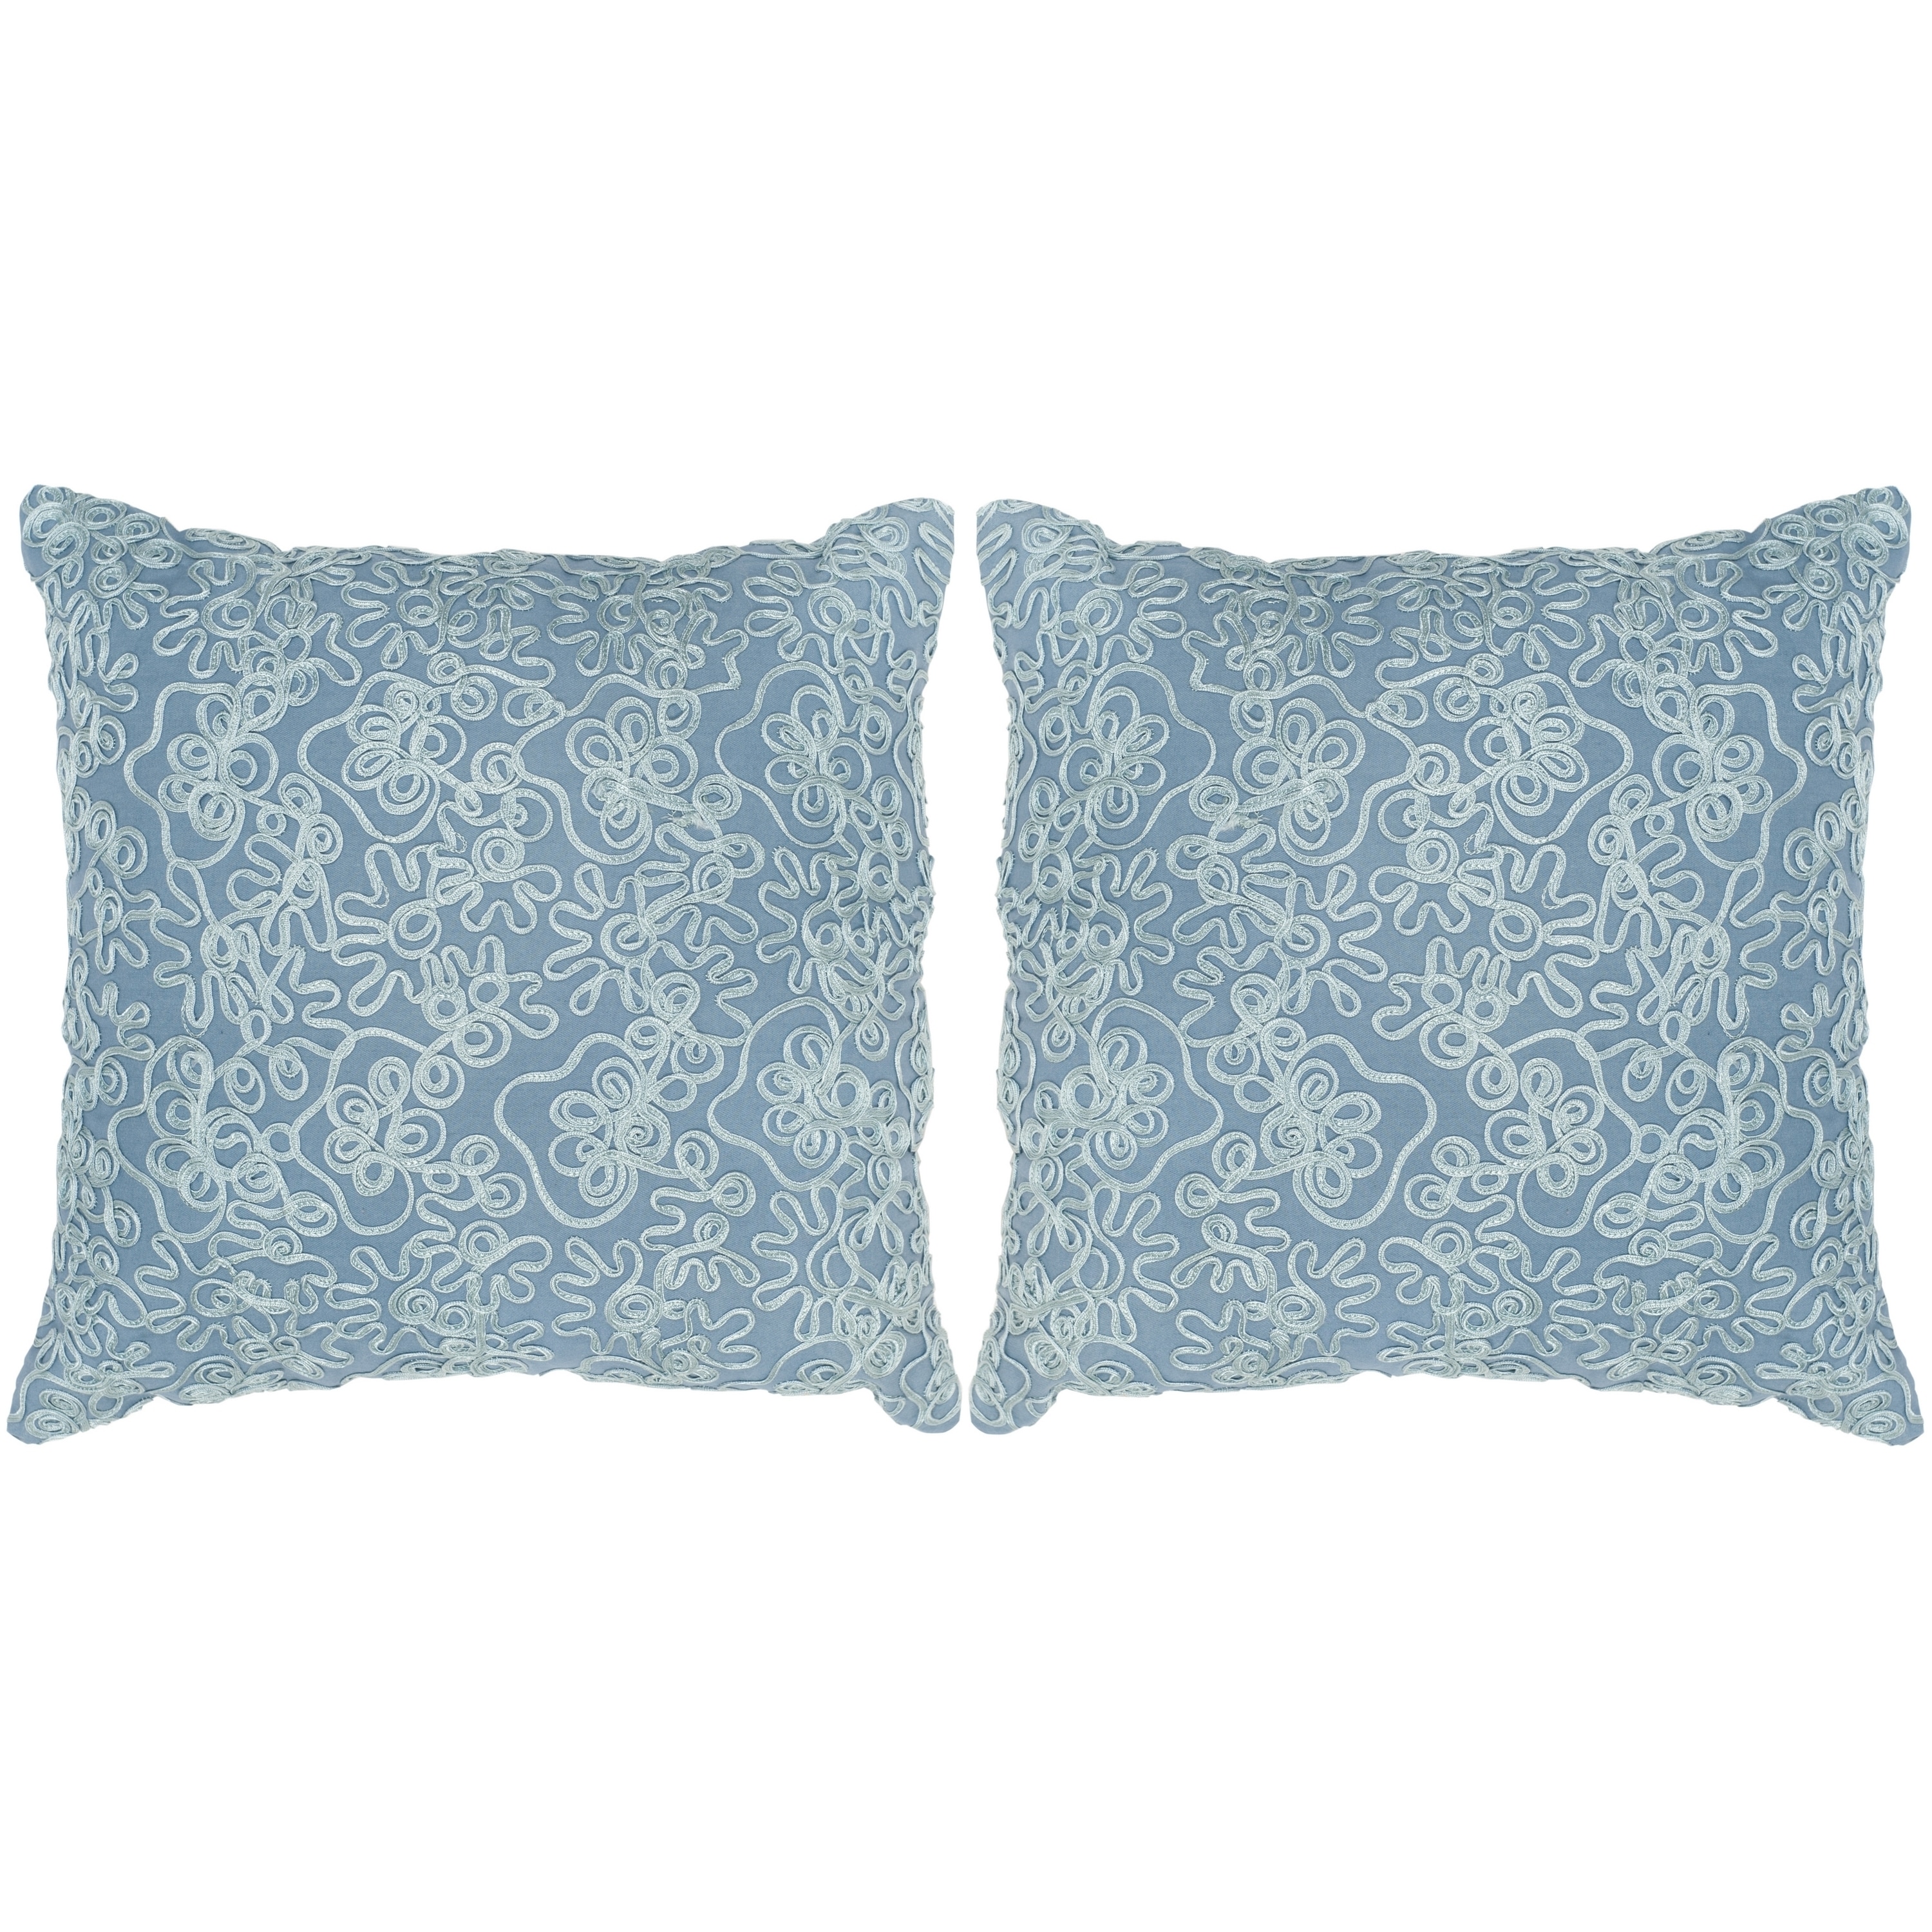 20 by 20-Inch Tape Swirl Wedgwood Blue Set of 2 Safavieh Pillow Collection Throw Pillows